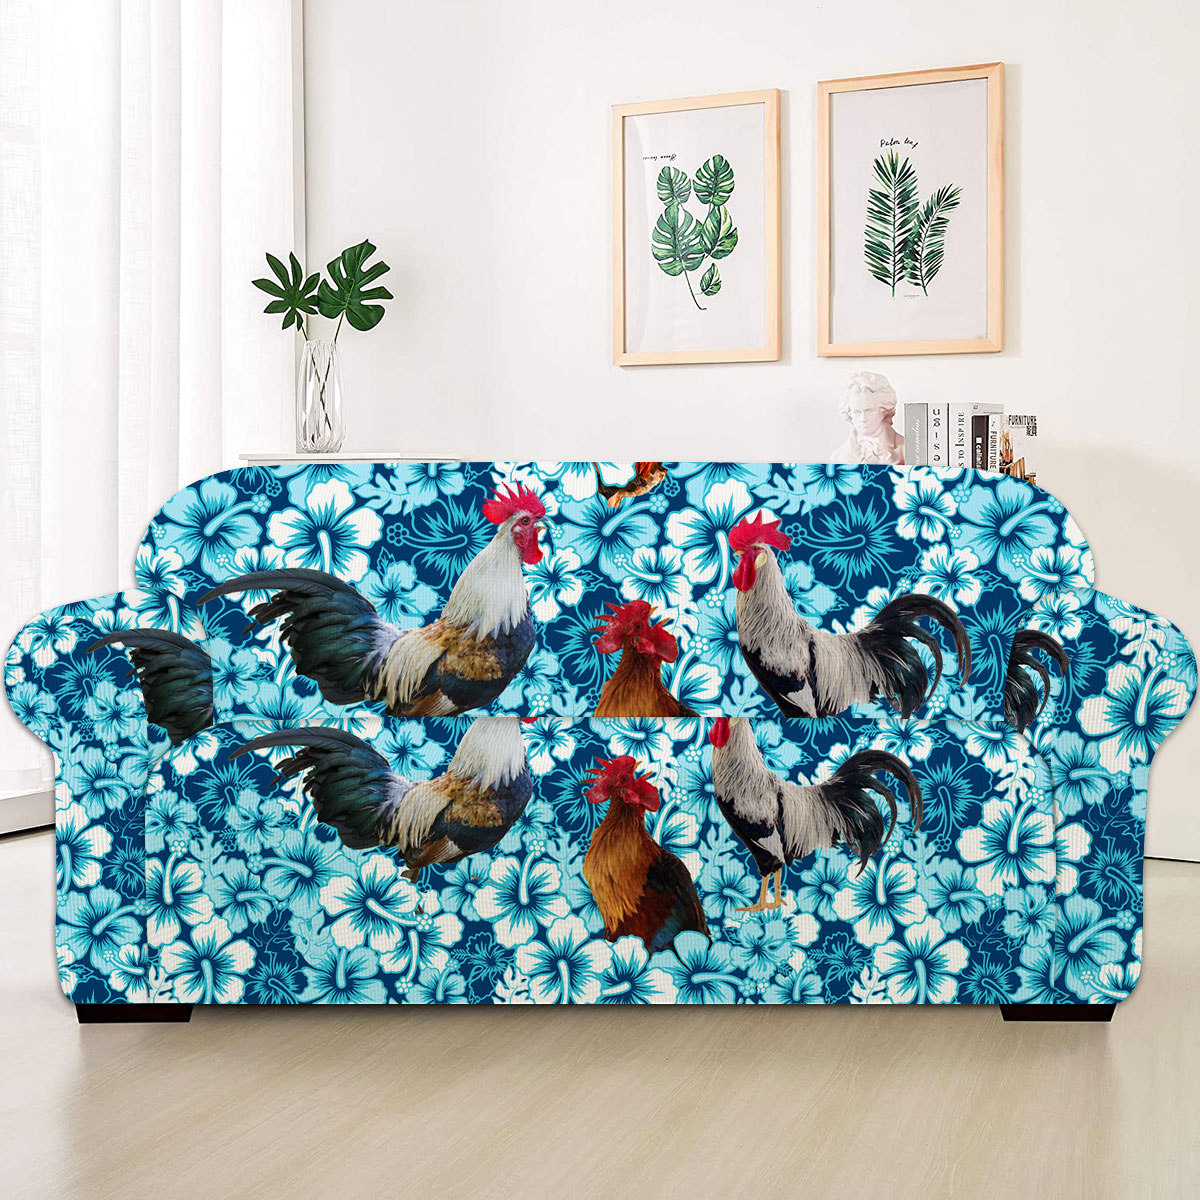 Chicken Blue Hibiscus Sofa Cover